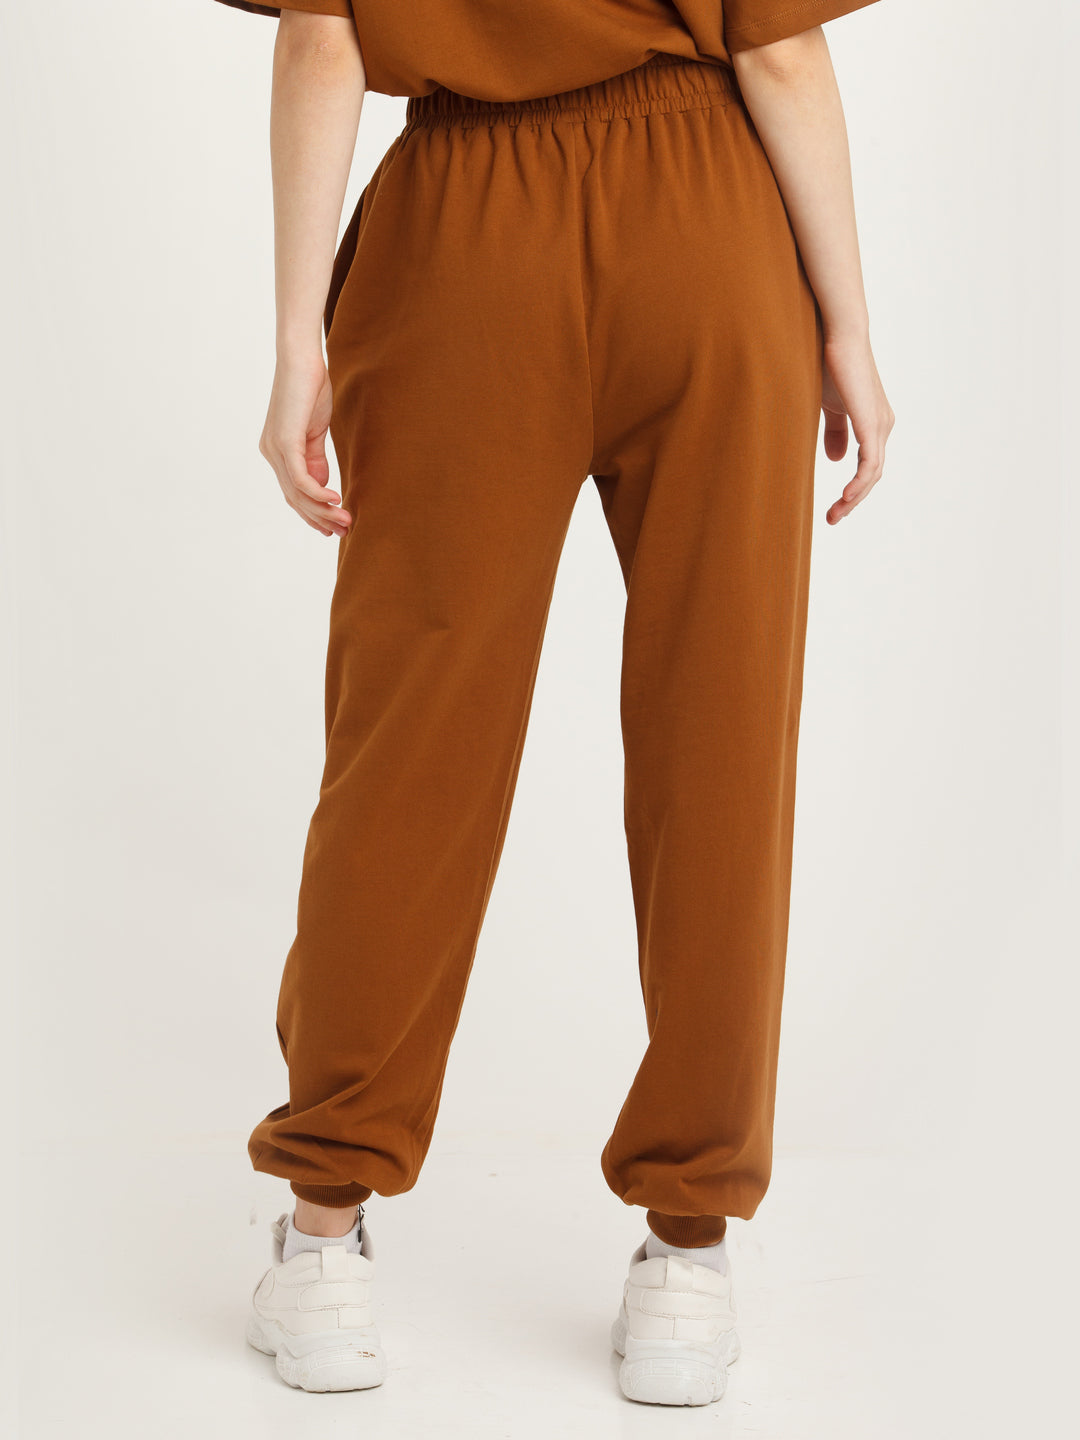 Brown Solid Joggers For Women